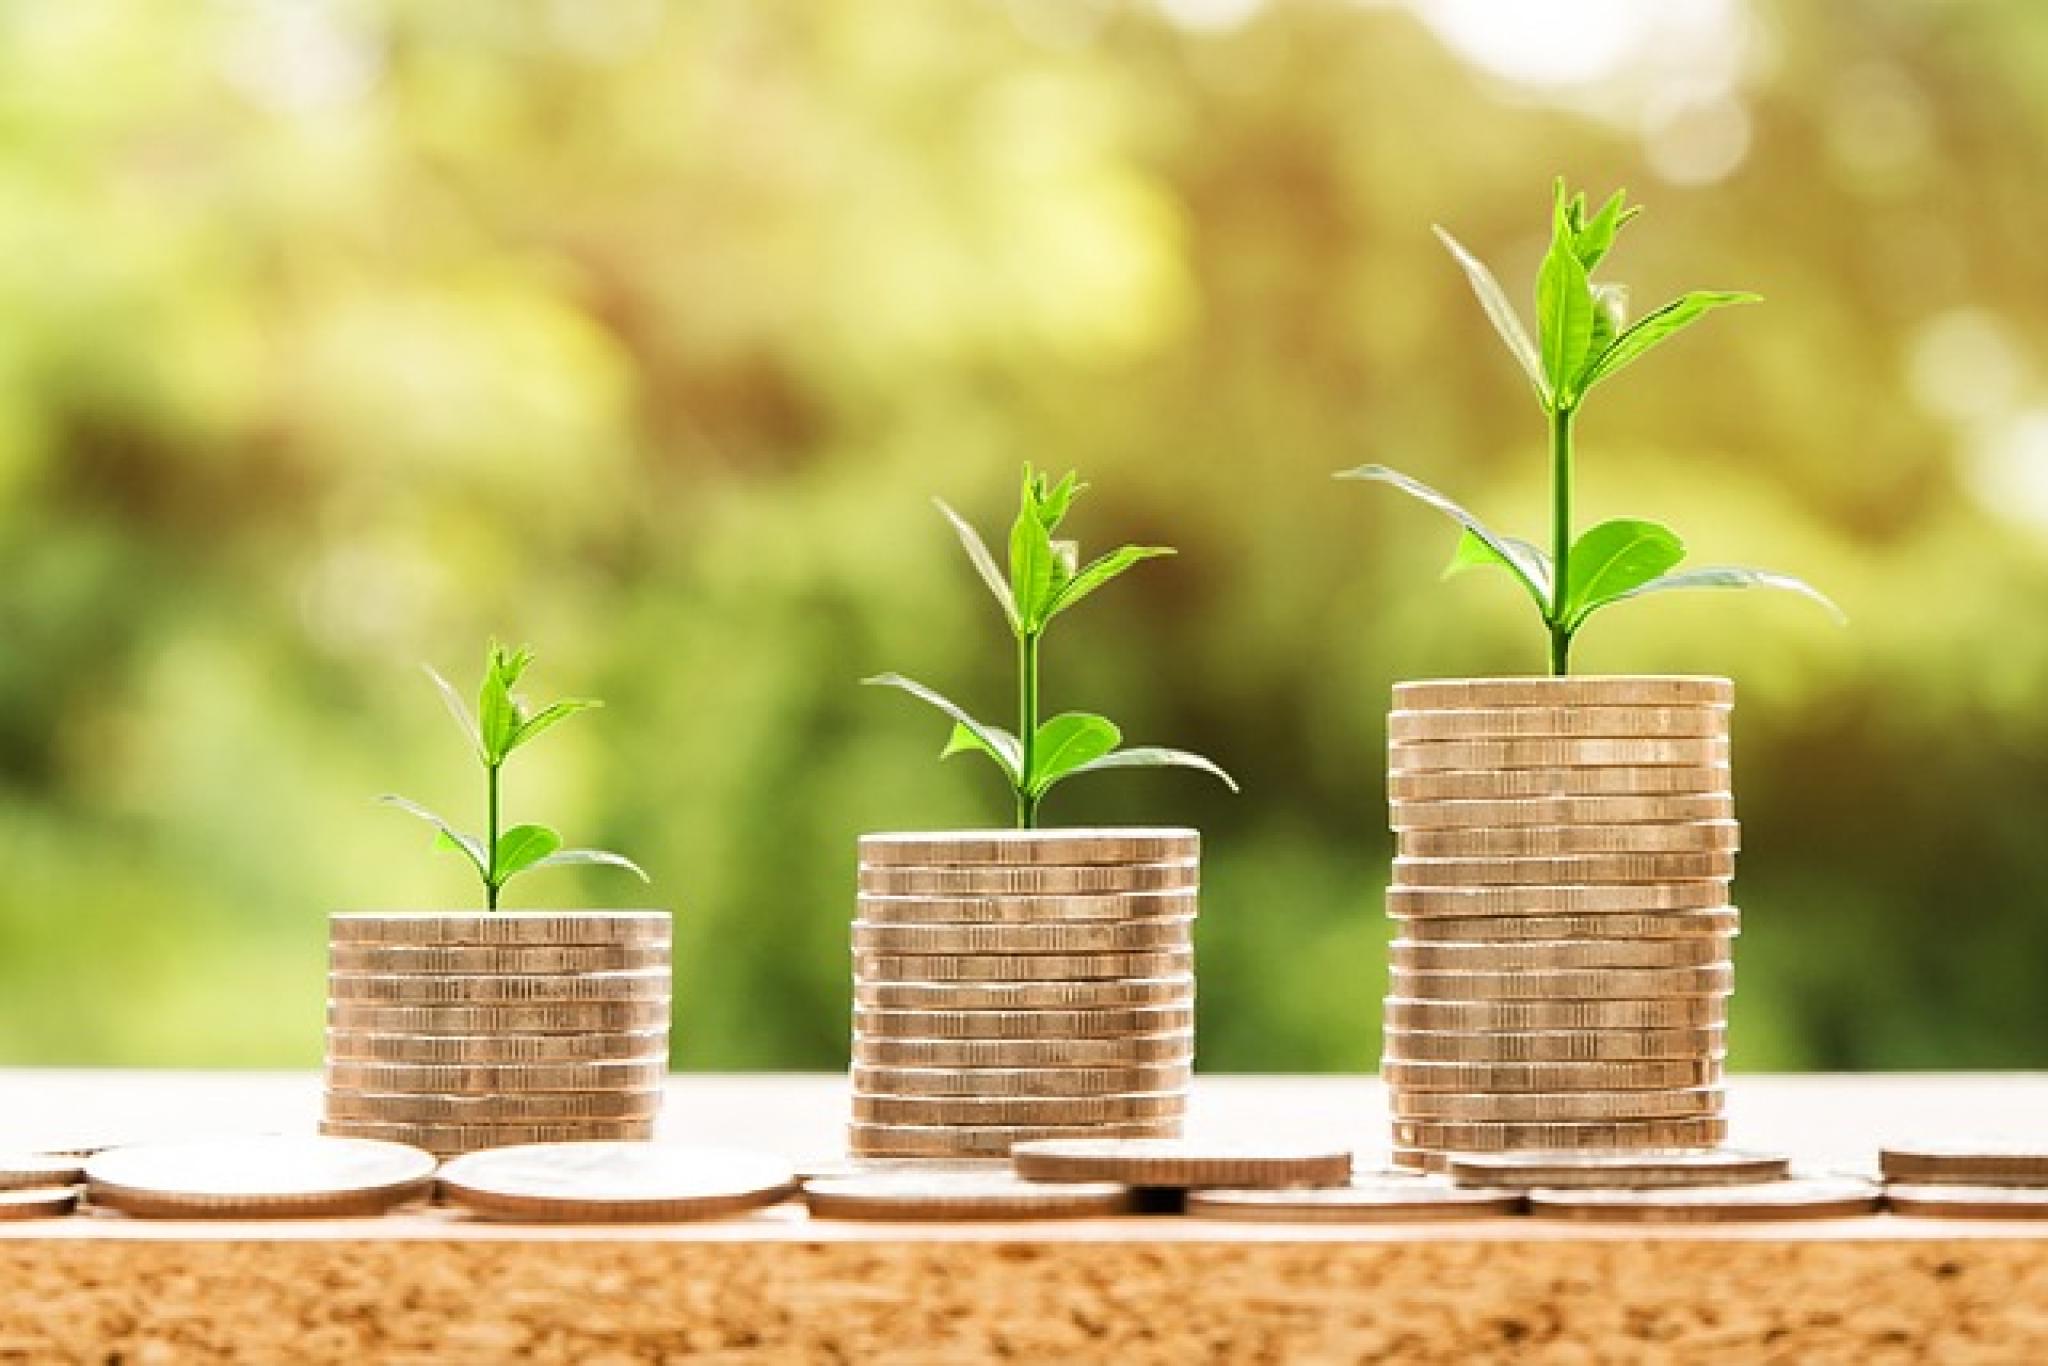 Image of plants sprouting from stacks of coins by nattanan23 from https://pixabay.com/photos/money-profit-finance-business-2696219/ (free to use under pixabay licence) 